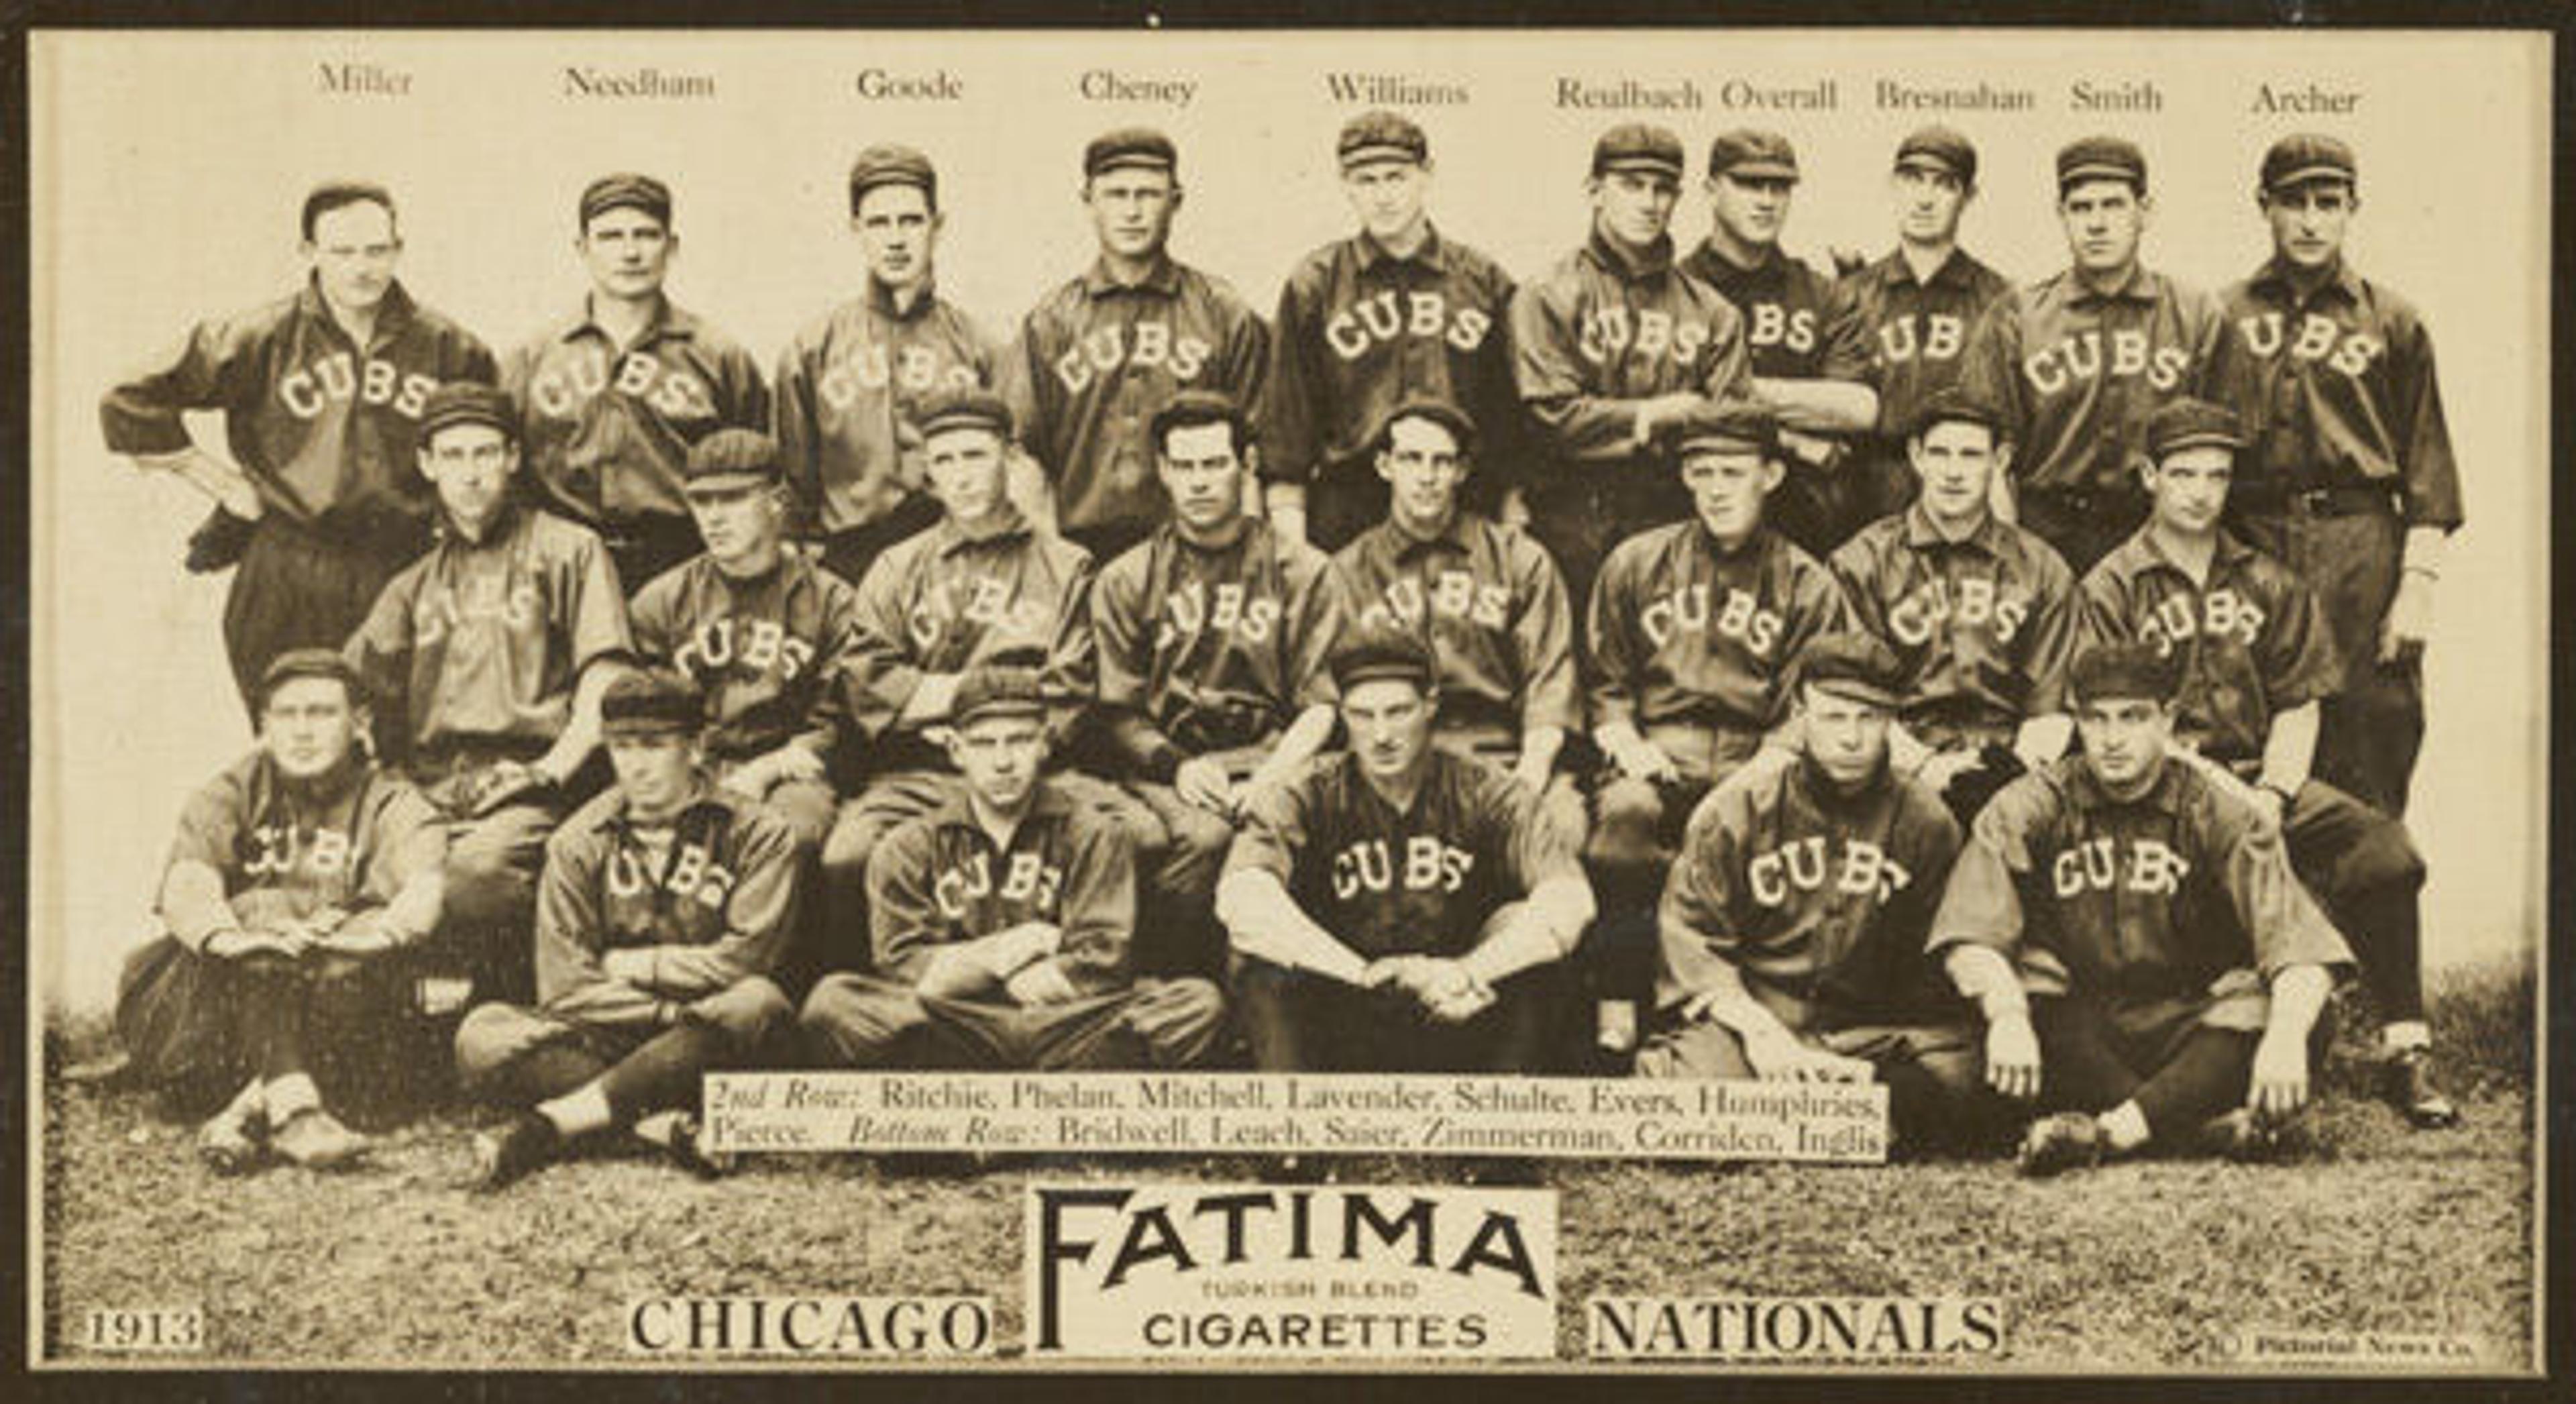 Liggett & Myers Tobacco Company (American, North Carolina). Chicago Cubs, National League, from the Baseball Team series (T200), issued by Liggett & Myers Tobacco Company to promote Fatima Turkish Blend Cigarettes, 1913. Photograph; sheet: 2 11/16 x 4 3/4 in. (6.9 x 12.1 cm). The Metropolitan Museum of Art, New York, The Jefferson R. Burdick Collection, Gift of Jefferson R. Burdick (63.350.246.200.12). Photographic copyright, The Pictorial News Co.